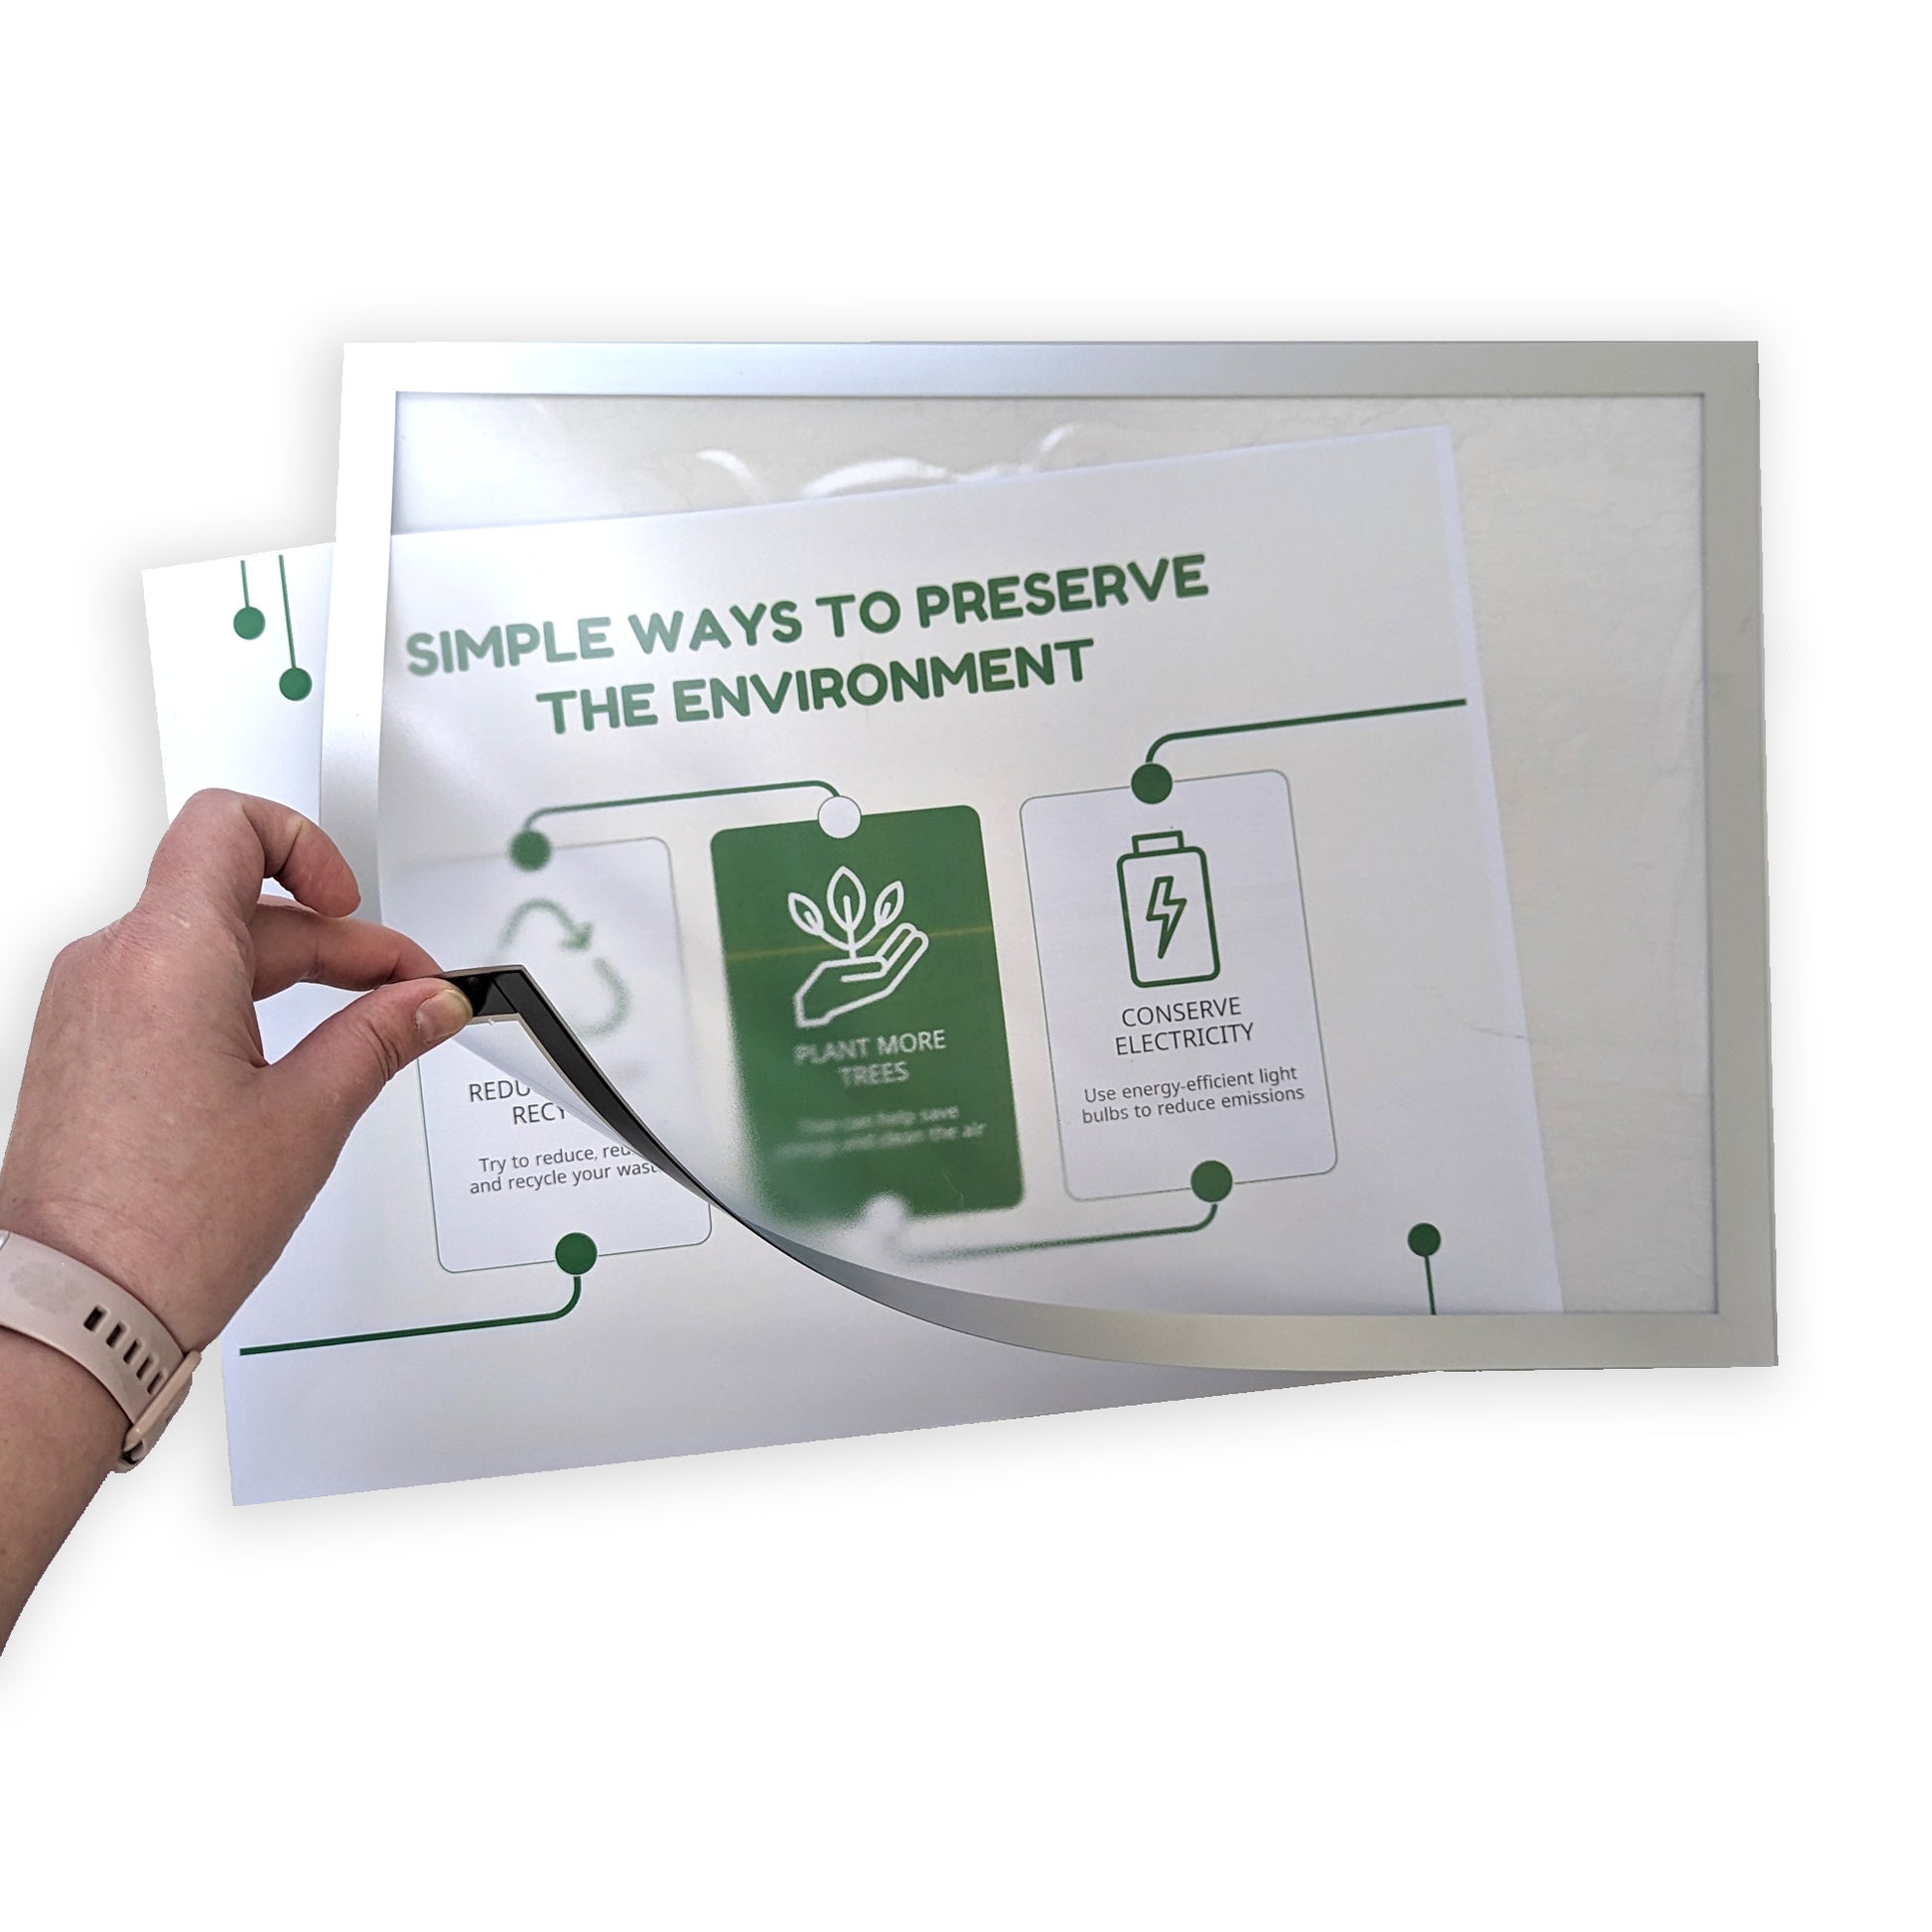 A person's hand is shown peeling back the corner of an A3 self-adhesive magnetic display frame to insert a poster with the message 'SIMPLE WAYS TO PRESERVE THE ENVIRONMENT', featuring eco-friendly tips such as 'PLANT MORE TREES' and 'CONSERVE ELECTRICITY'.